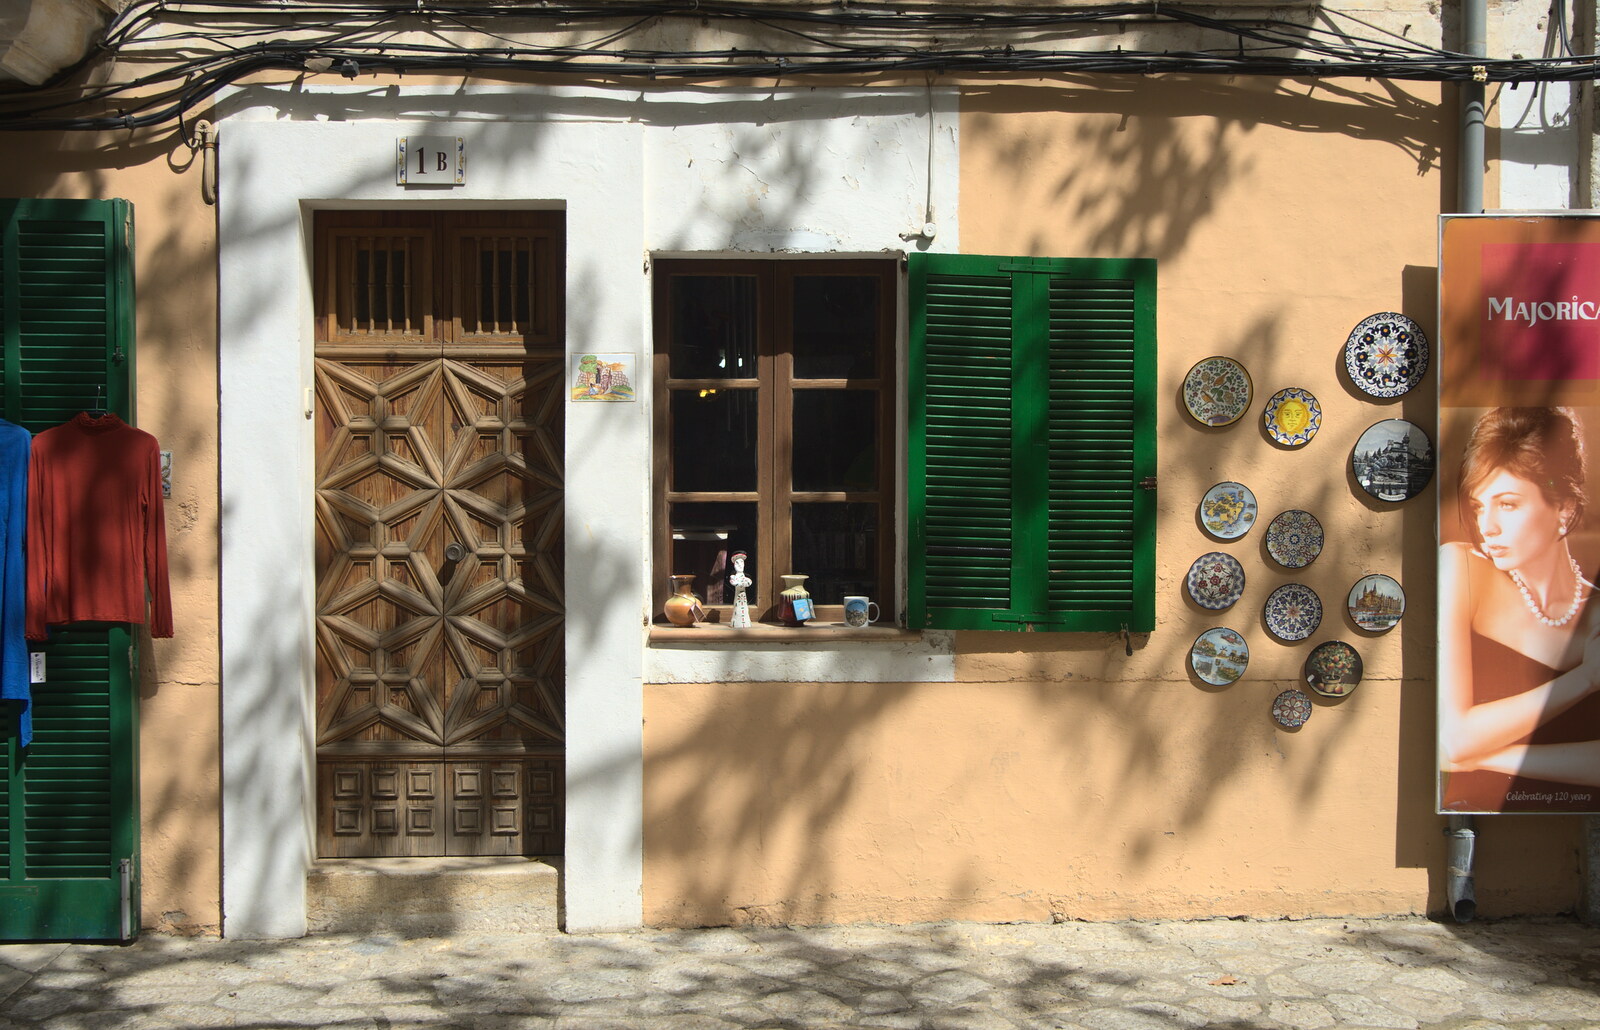 Green shutters and an interesting door from A Few Hours in Valdemossa, Mallorca, Spain - 13th September 2012